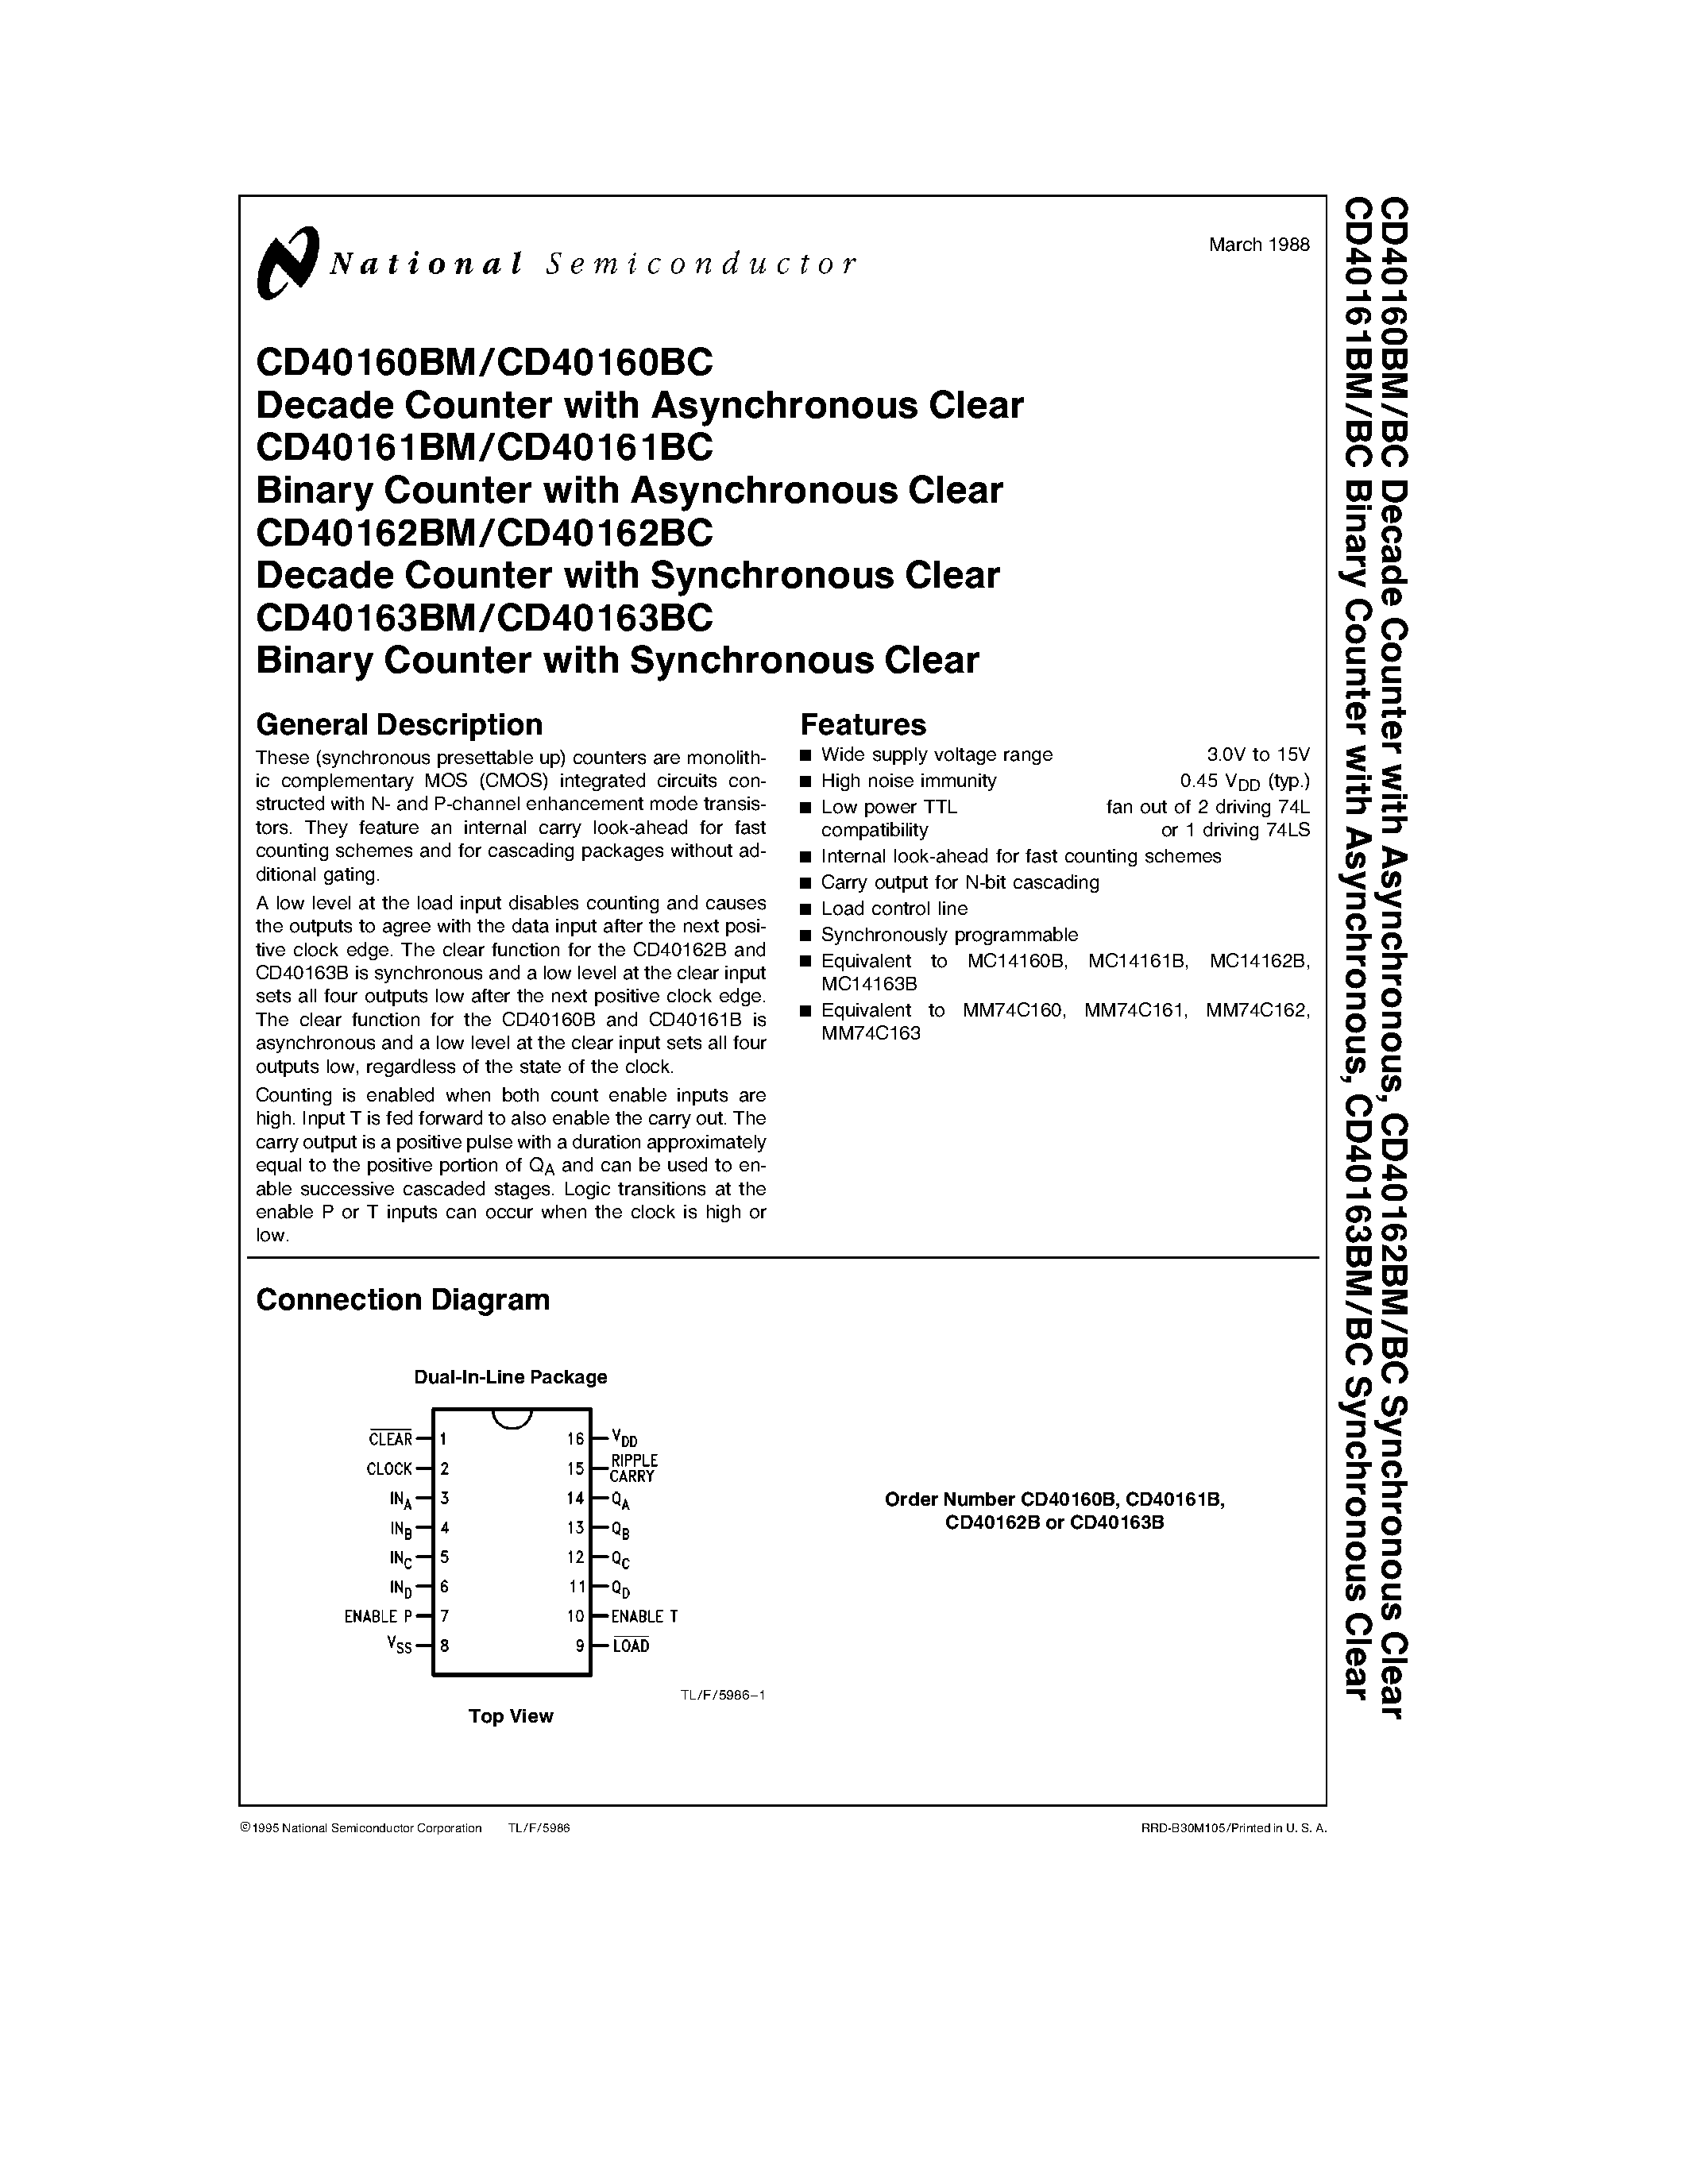 Datasheet CD40160BC - (CD40160BM - CD40163BM) Decade Counter with Asynchronous Clear page 1